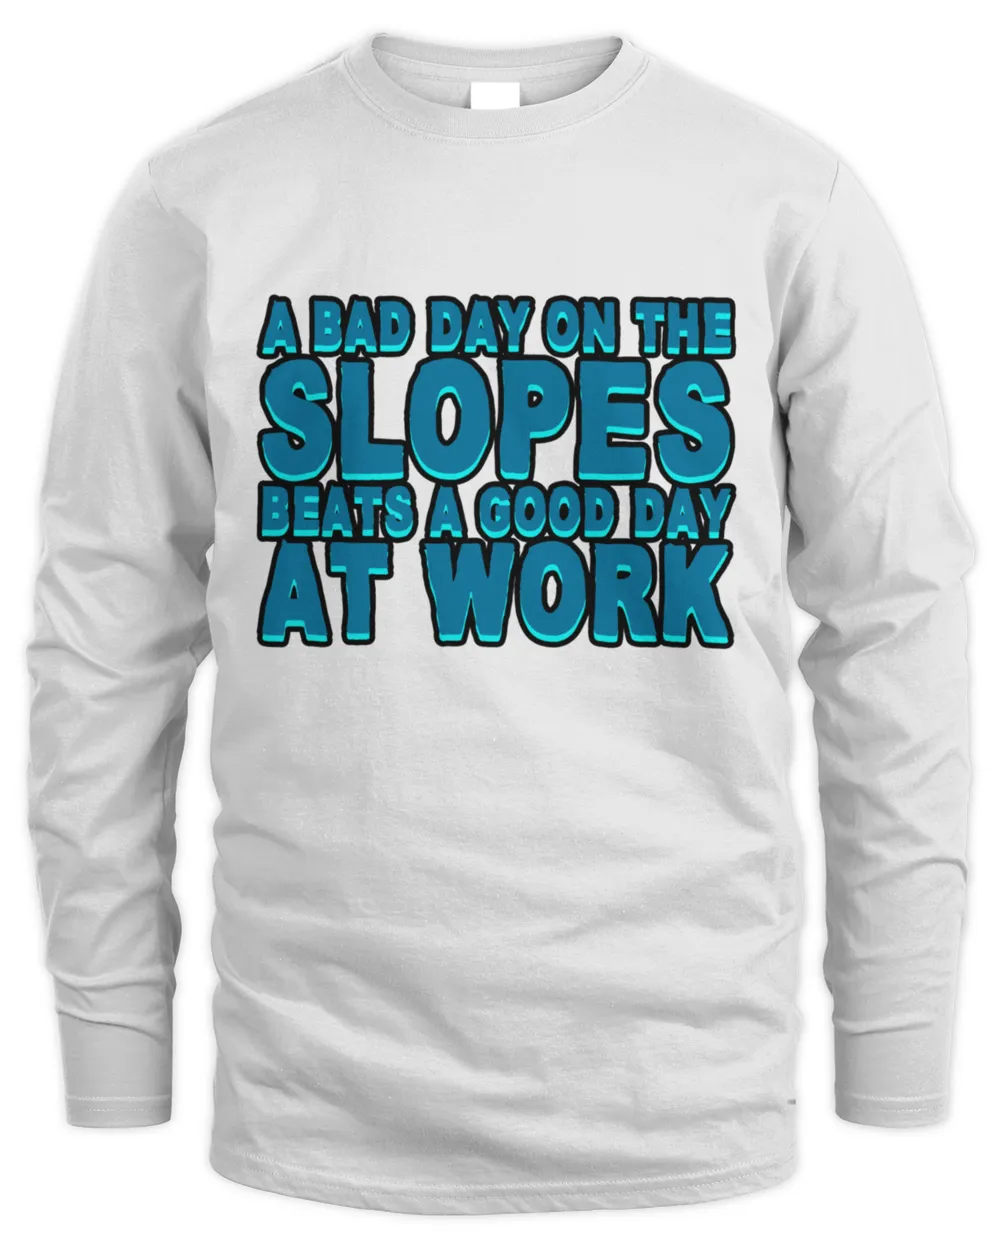 A Bad Day On The Slopes Beats A Good Day At Work 15098 T-Shirt